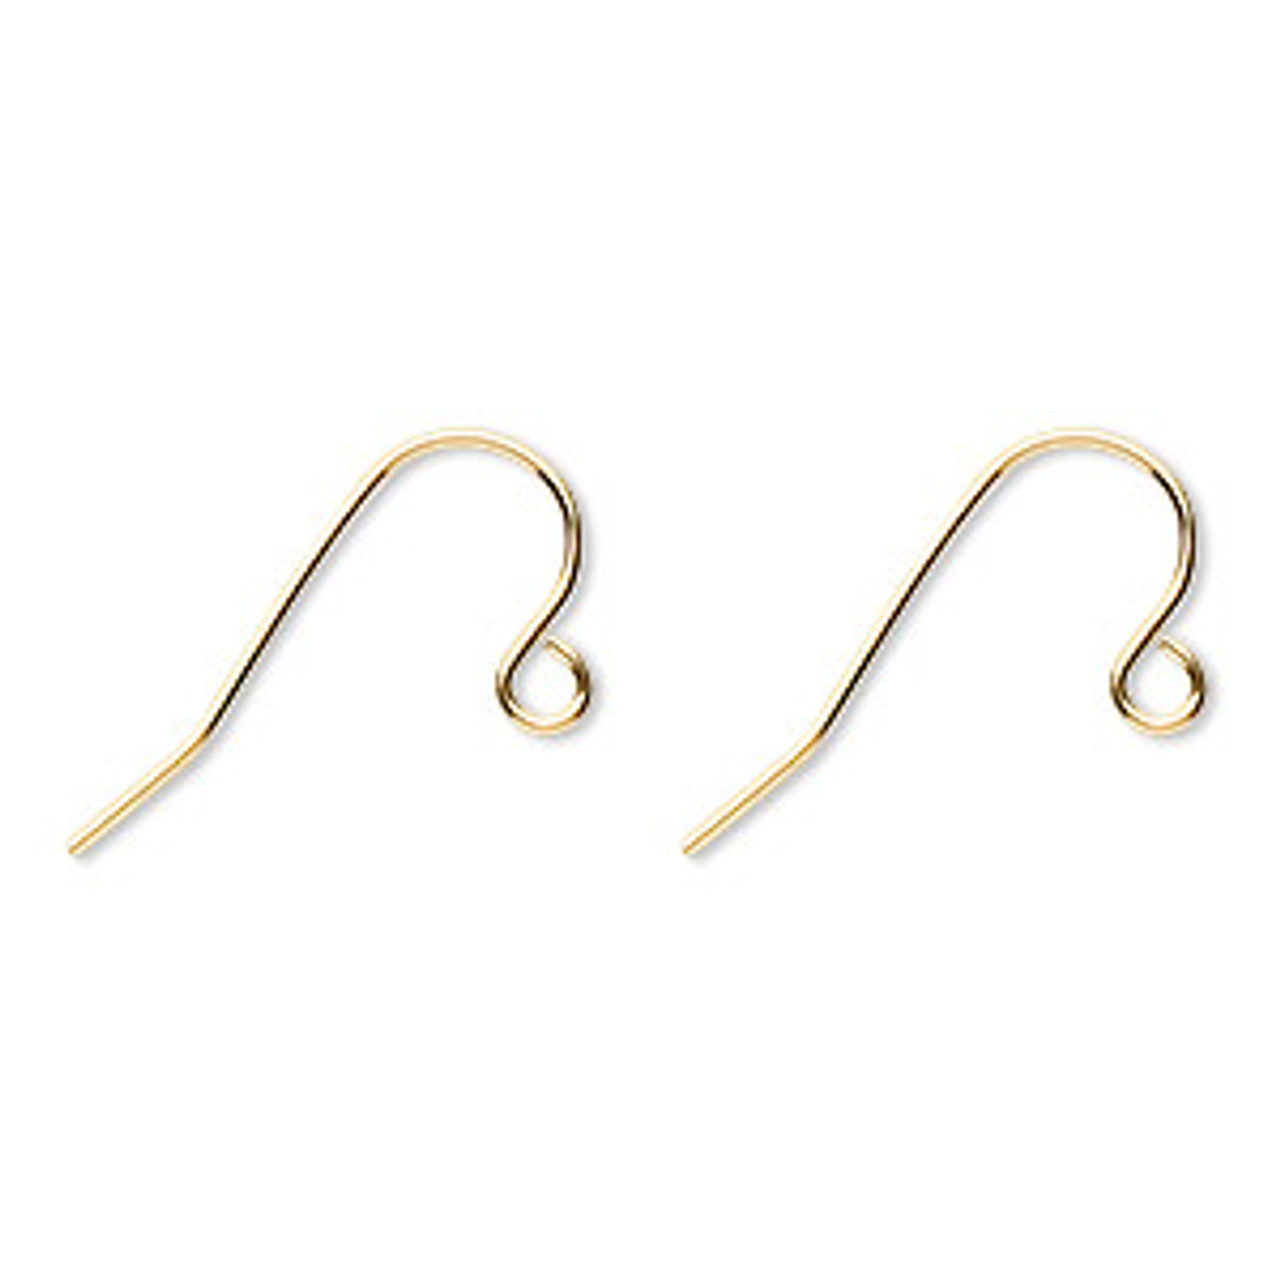 Fish Hook Earring Wires - Gold Plated - 15mm | Bradford Bead Shop